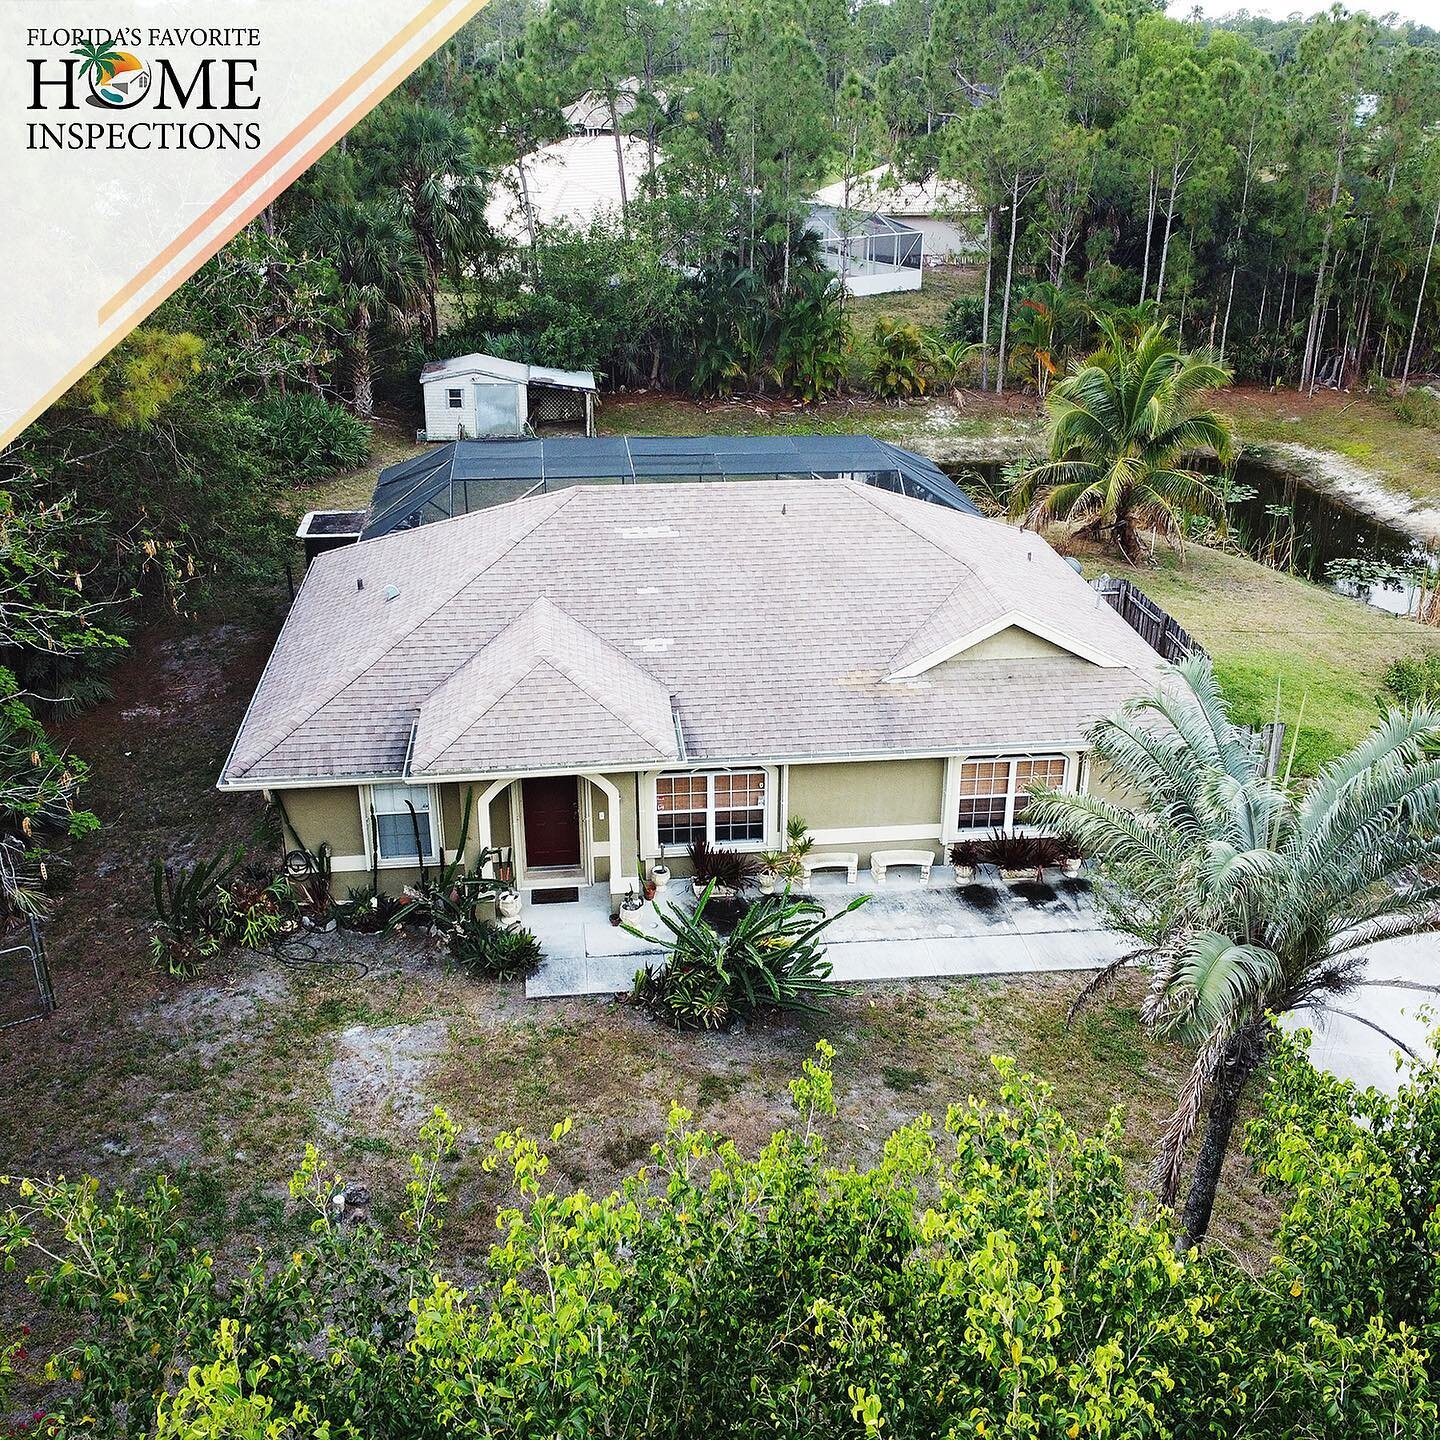 Home inspection in Loxahatchee, Florida!